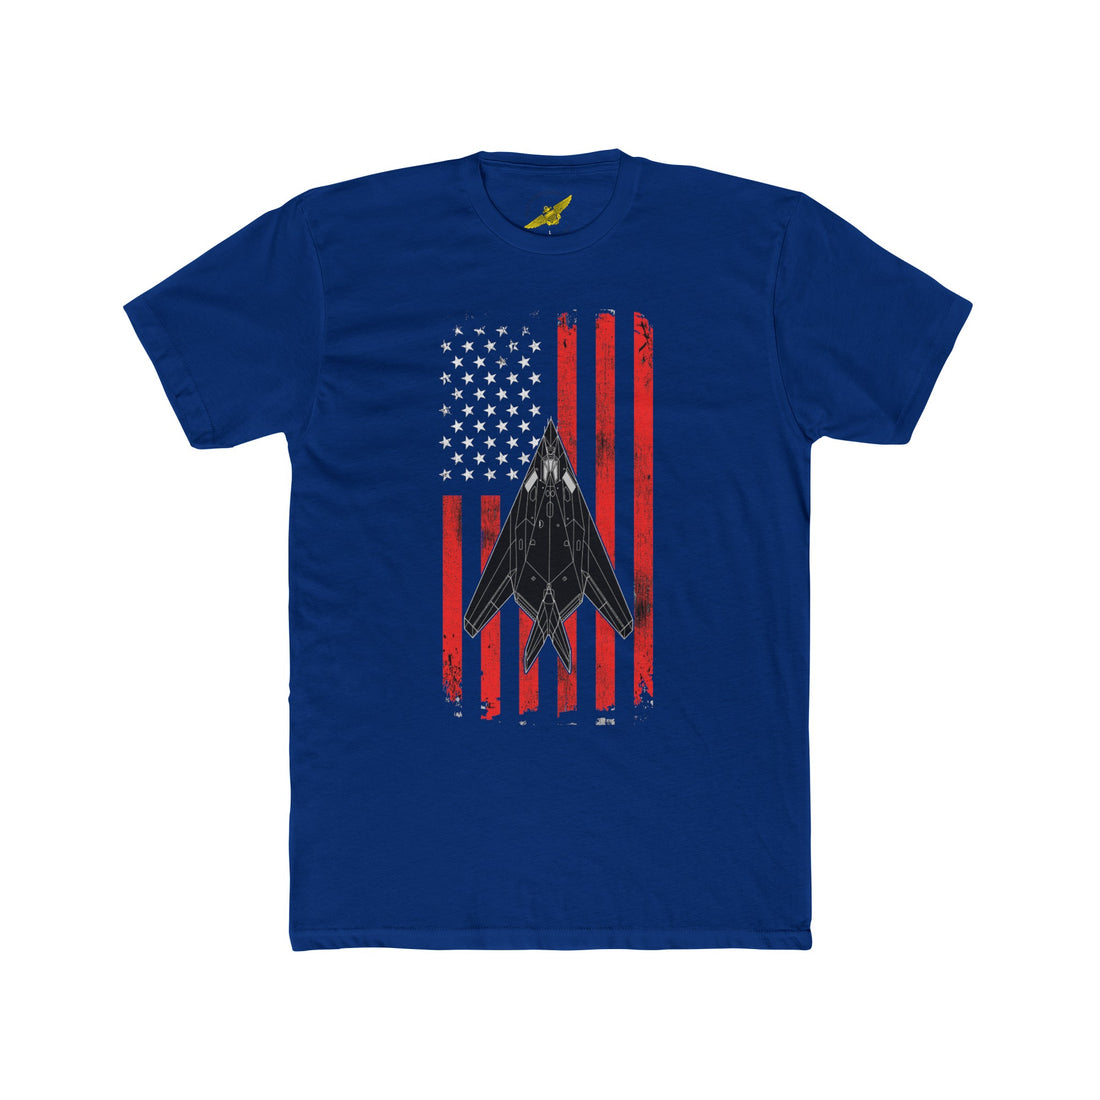 F-117 Nighthawk Patriotic Flag Tee, US Air Force Stealth Attack Aircraft